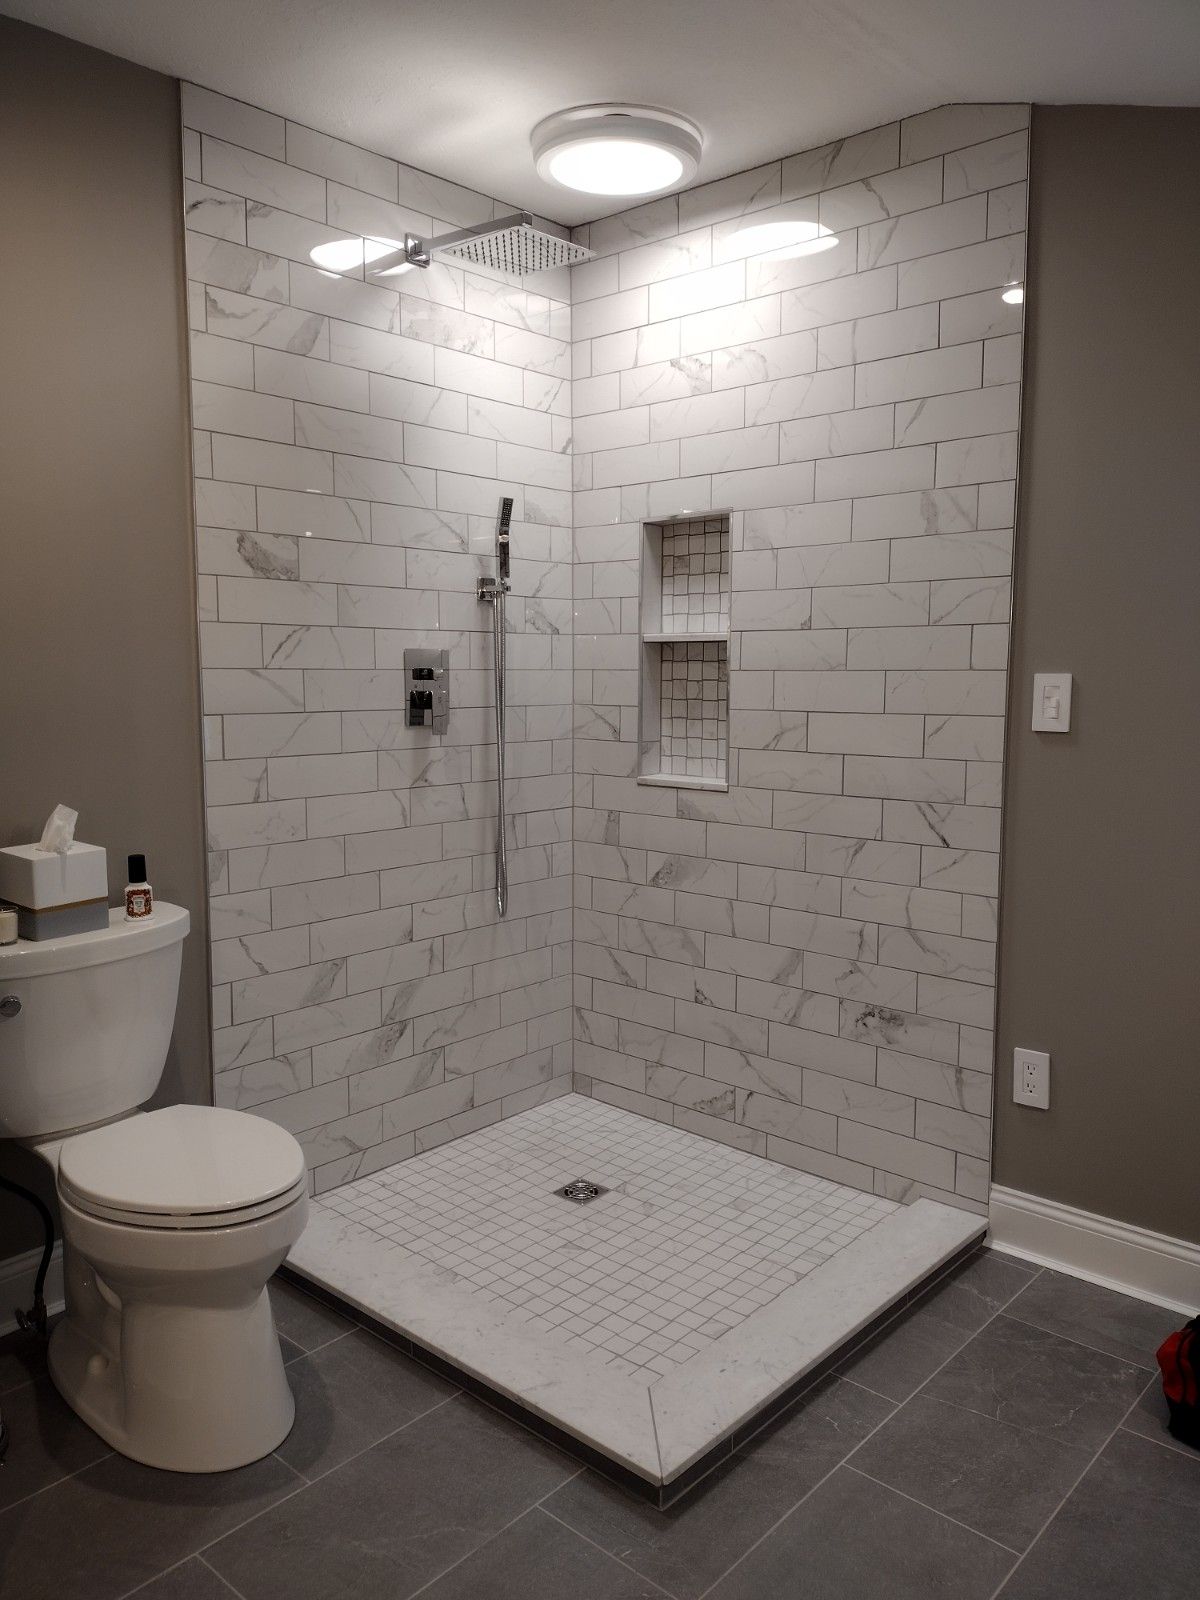 A bathroom with a toilet and a walk in shower.